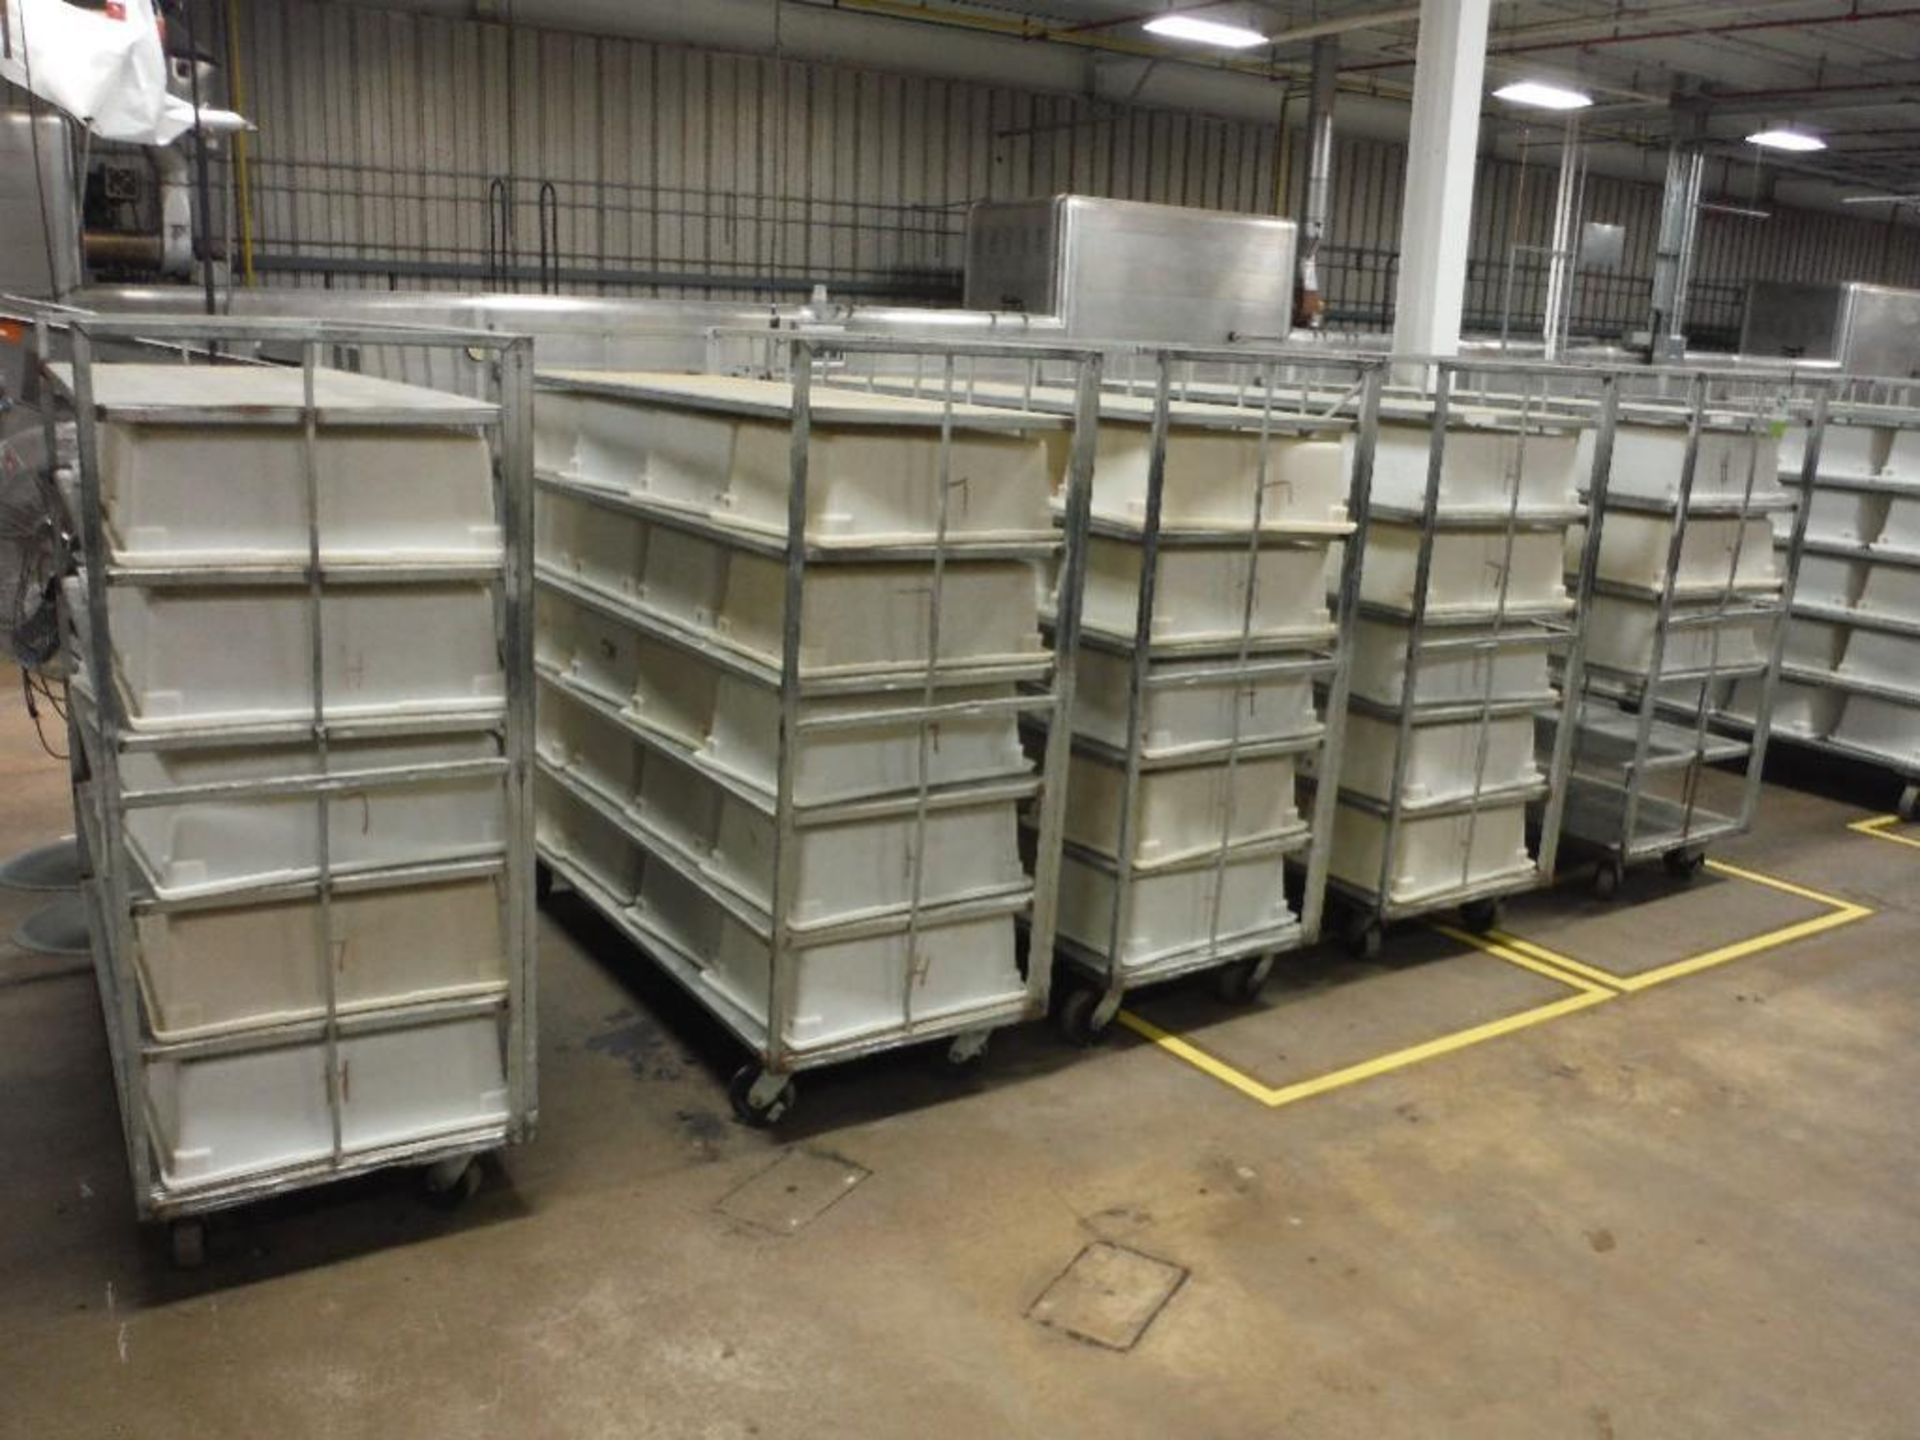 Cumberland galvanized tub carts and tubs, 75 in. long x 28 in. wide x 67 in. tall, 6 shelves, caster